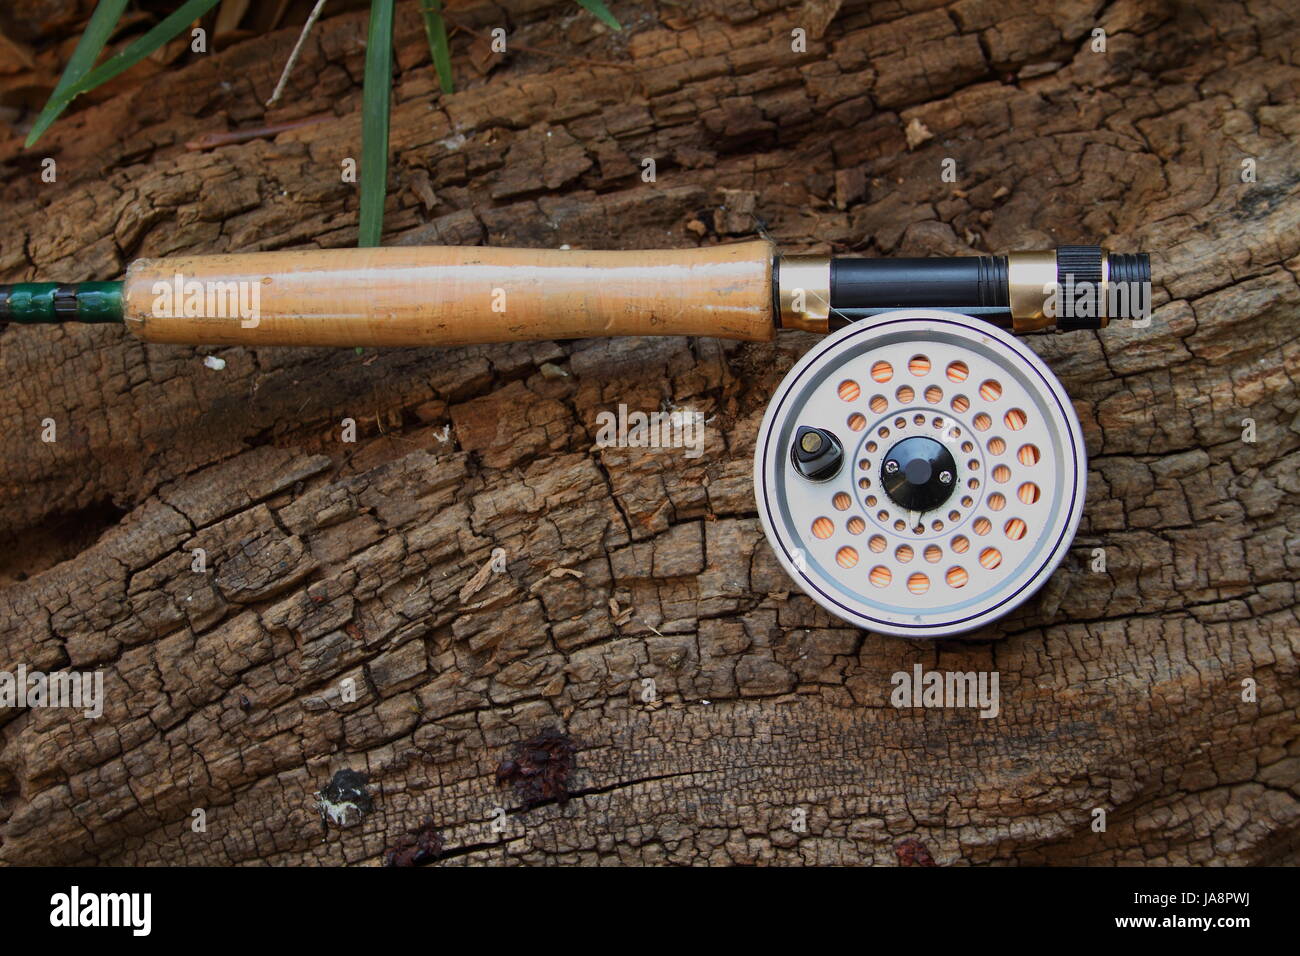 A fly fishing rod and reel on a log in the outdoors Stock Photo